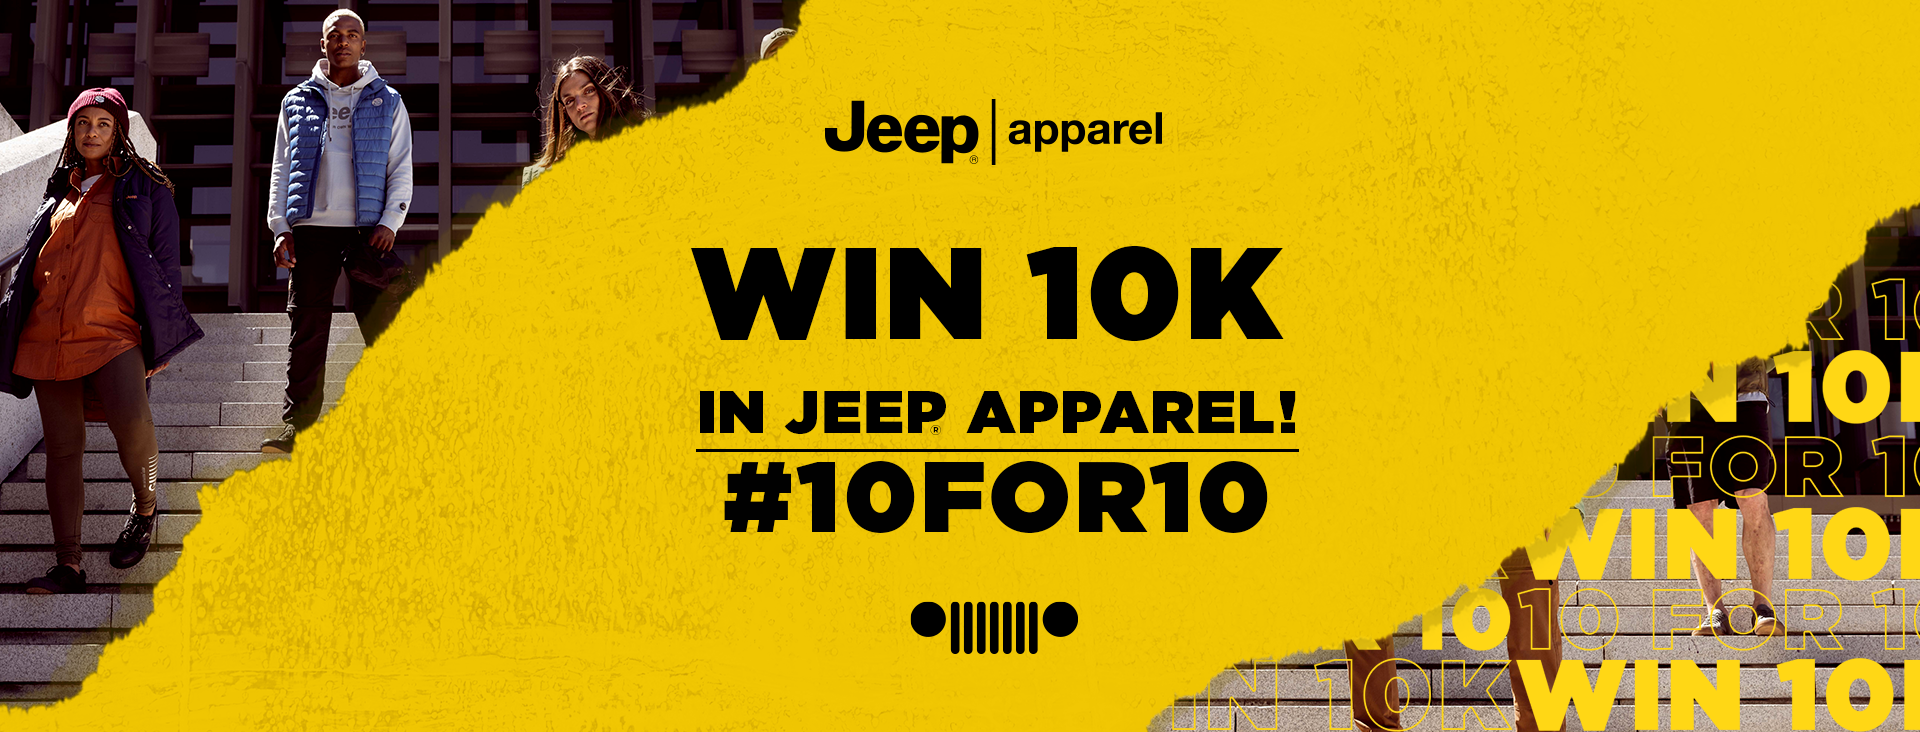 Jeep_10for10_1